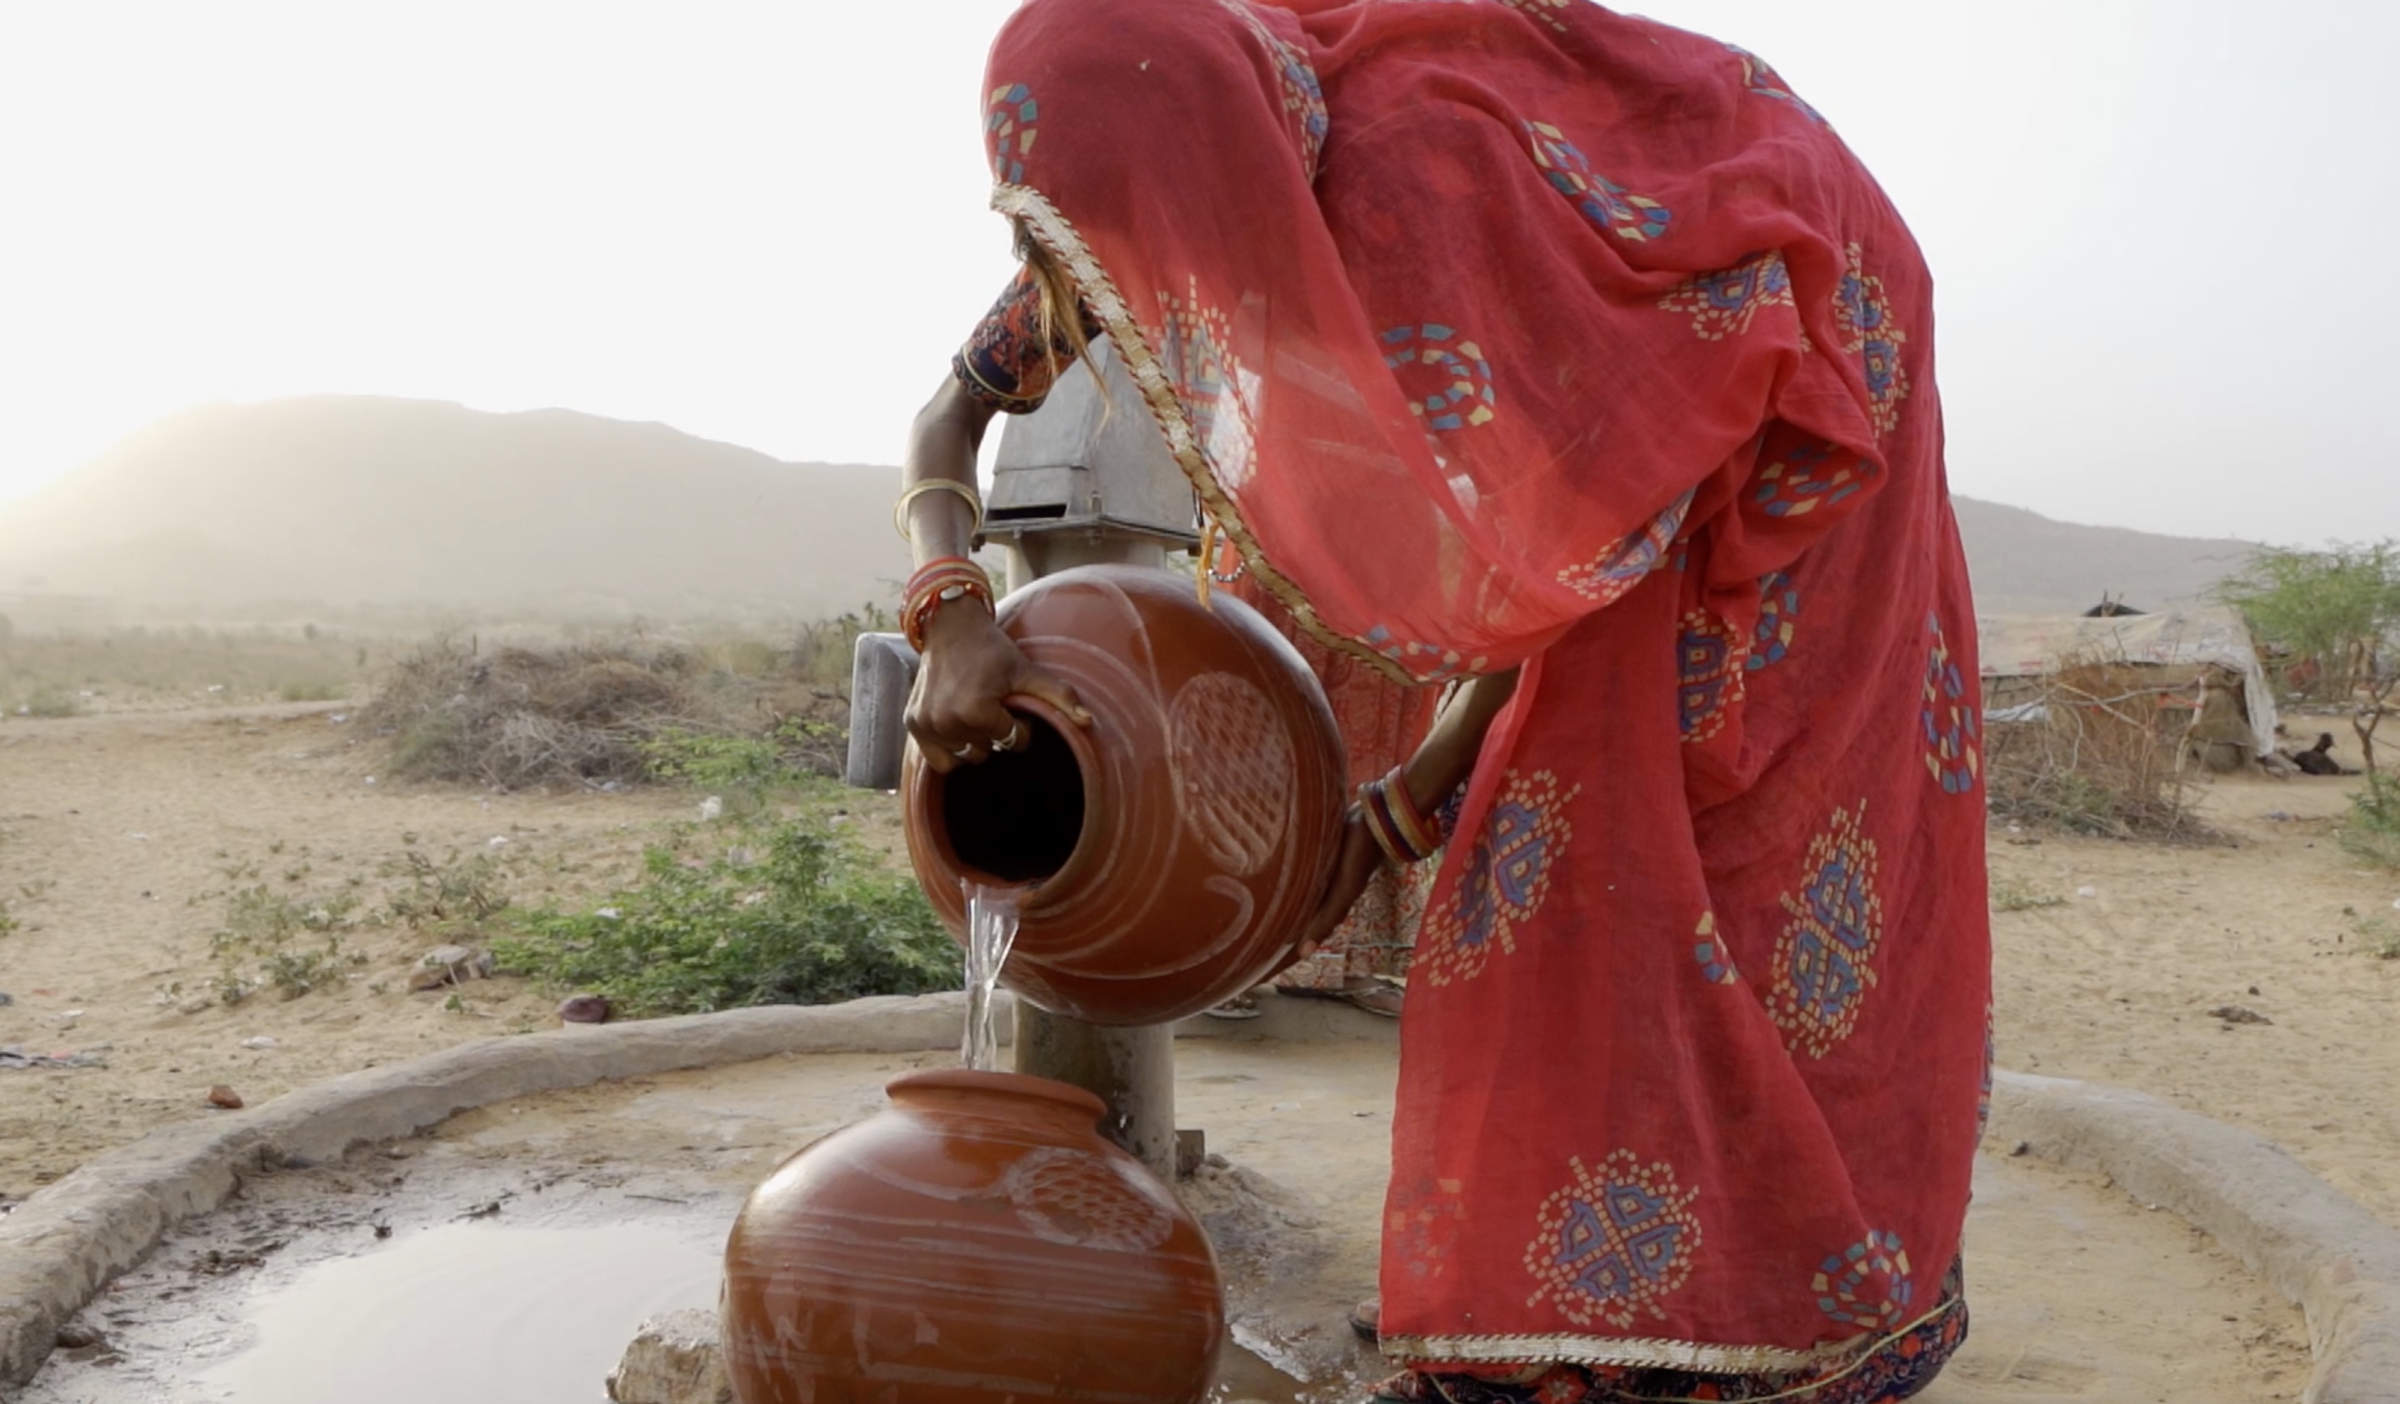 A woman in a sari pouring water from one clay pot into the other